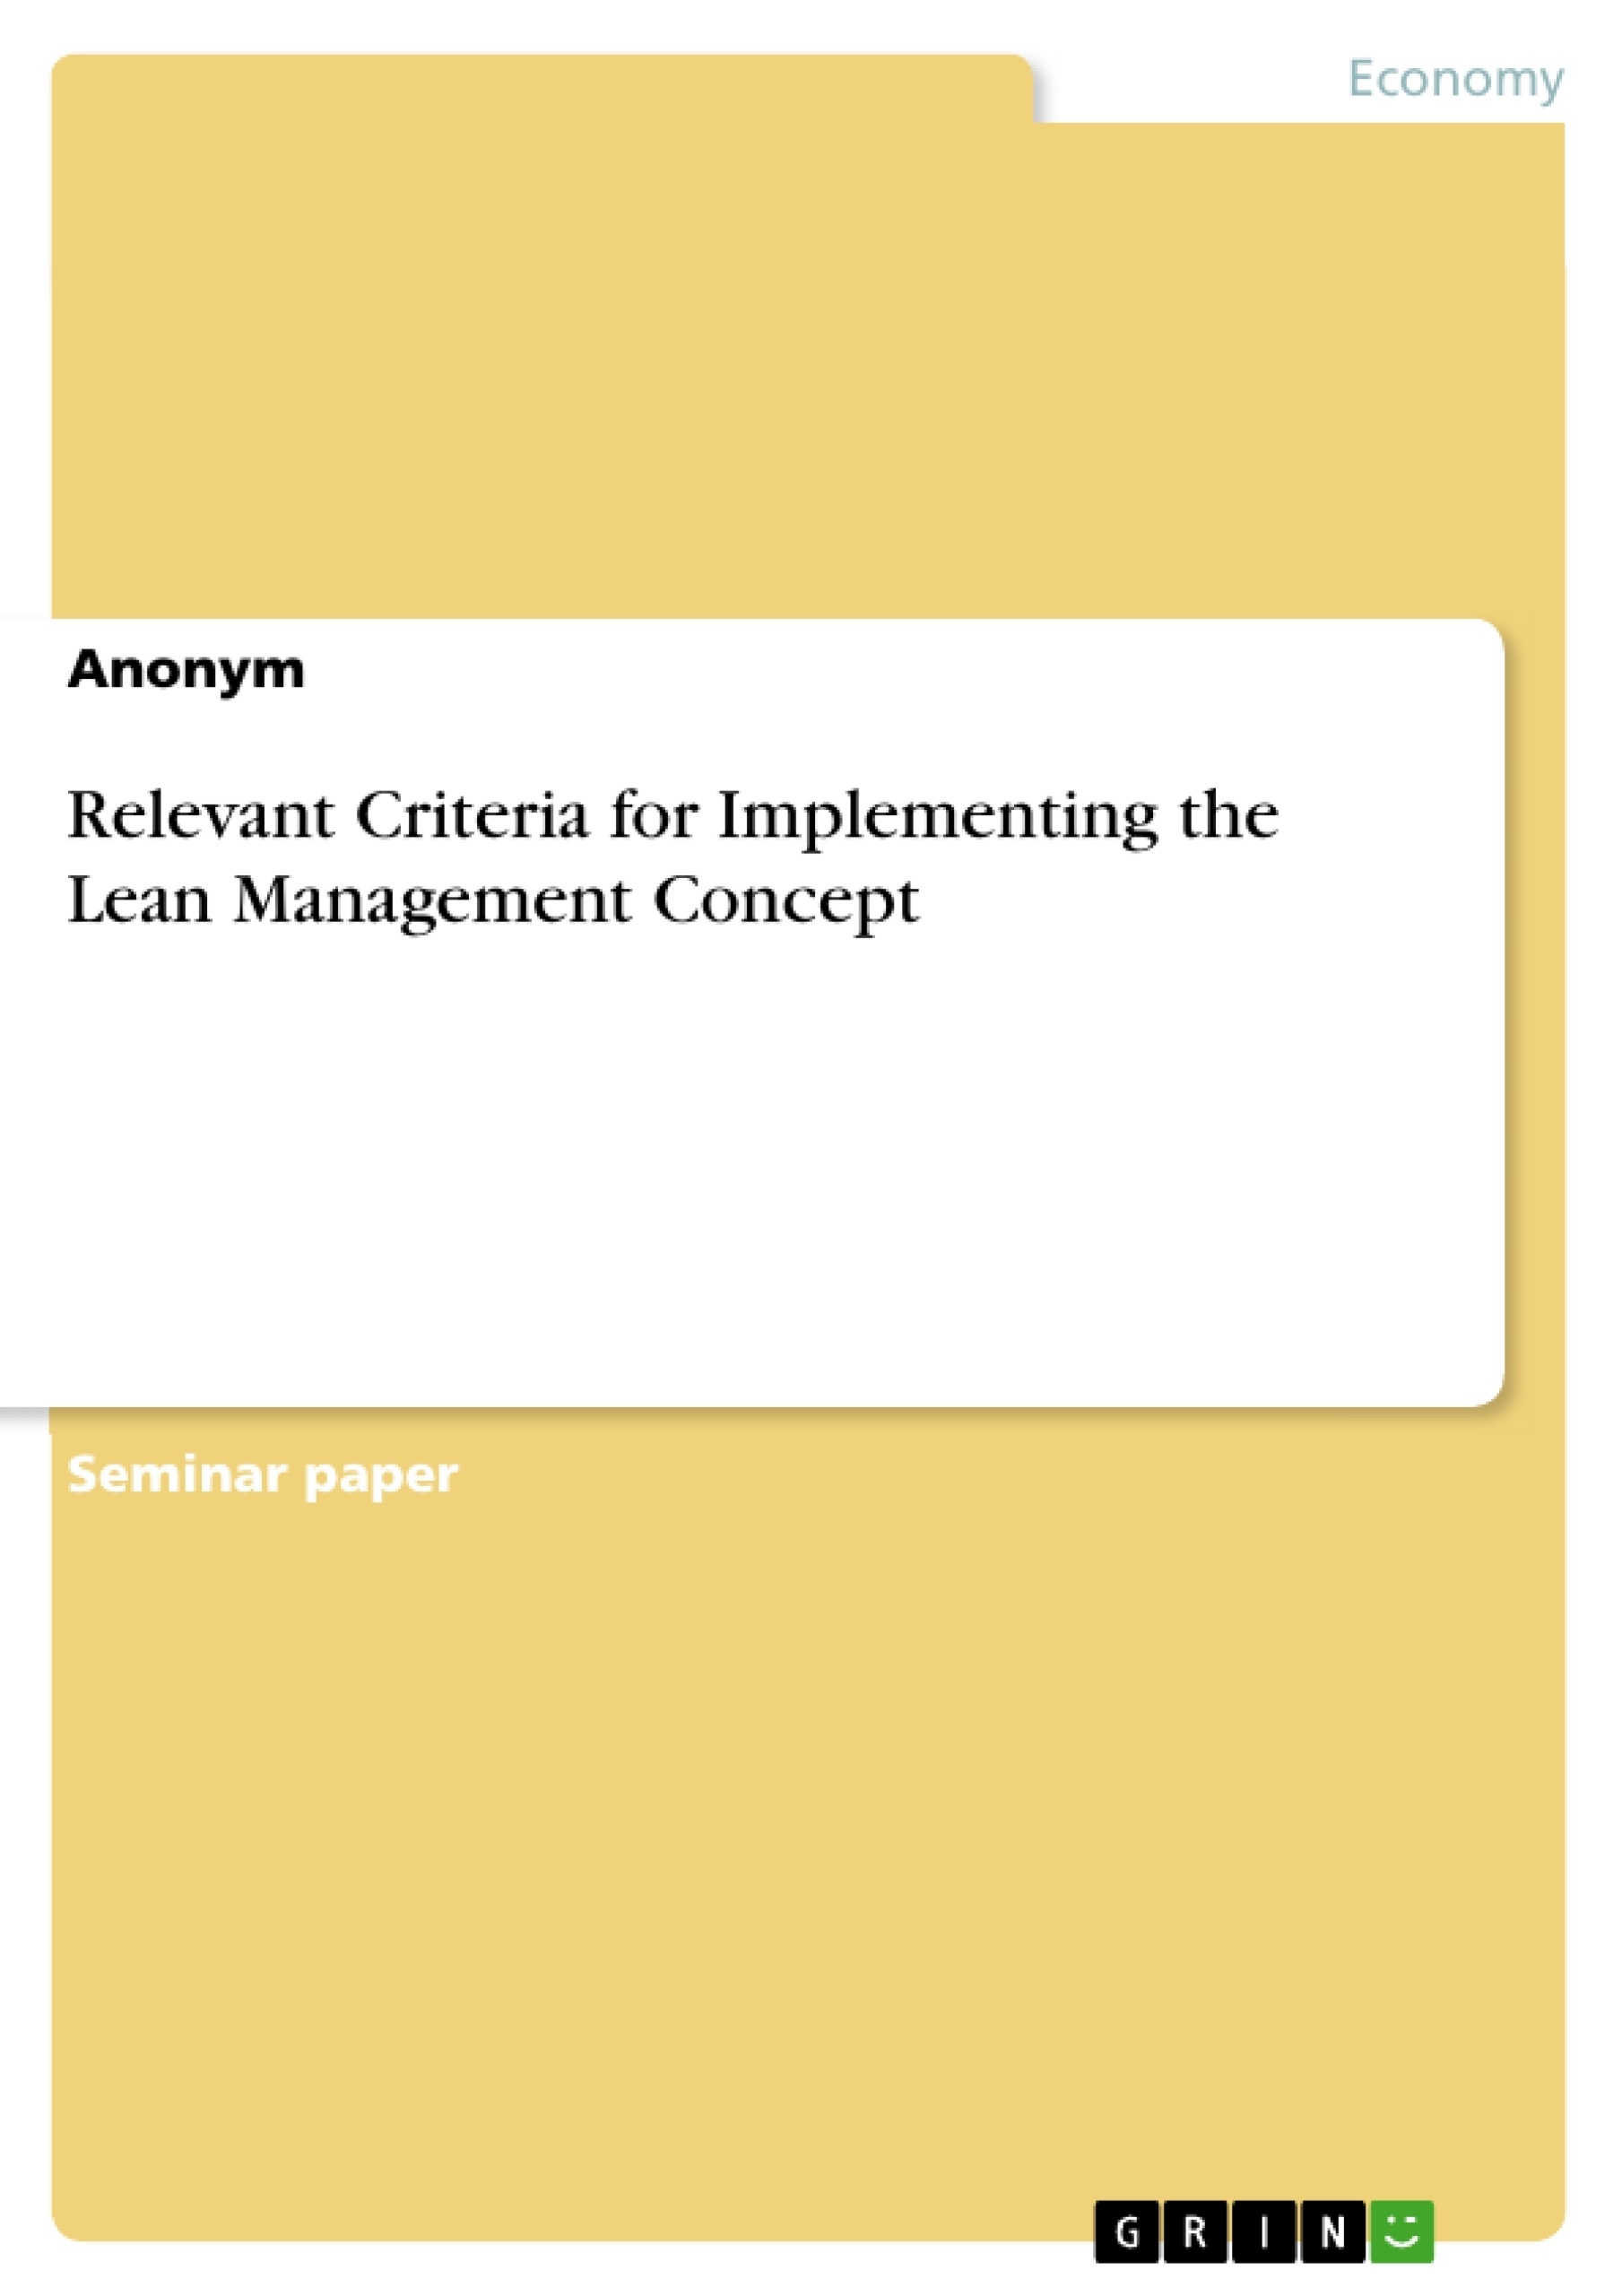 Title: Relevant Criteria for Implementing the Lean Management Concept